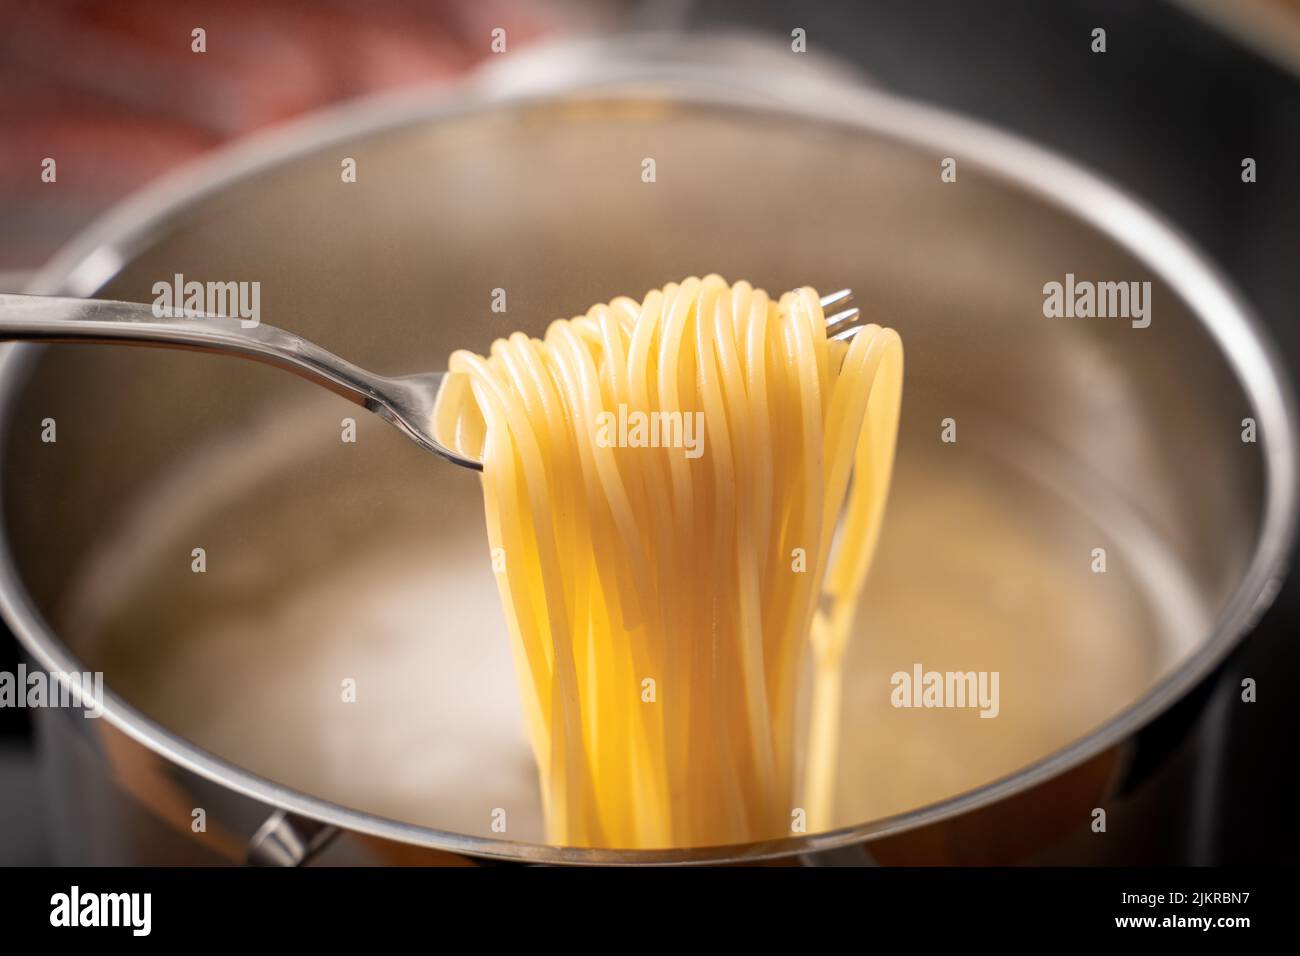 Spaghetti Noodles Are Boiling In A Pot Of Water On A Stove In The Kitchen. Pasta On A Fork To Test The Pasta For All Dente Stock Photo